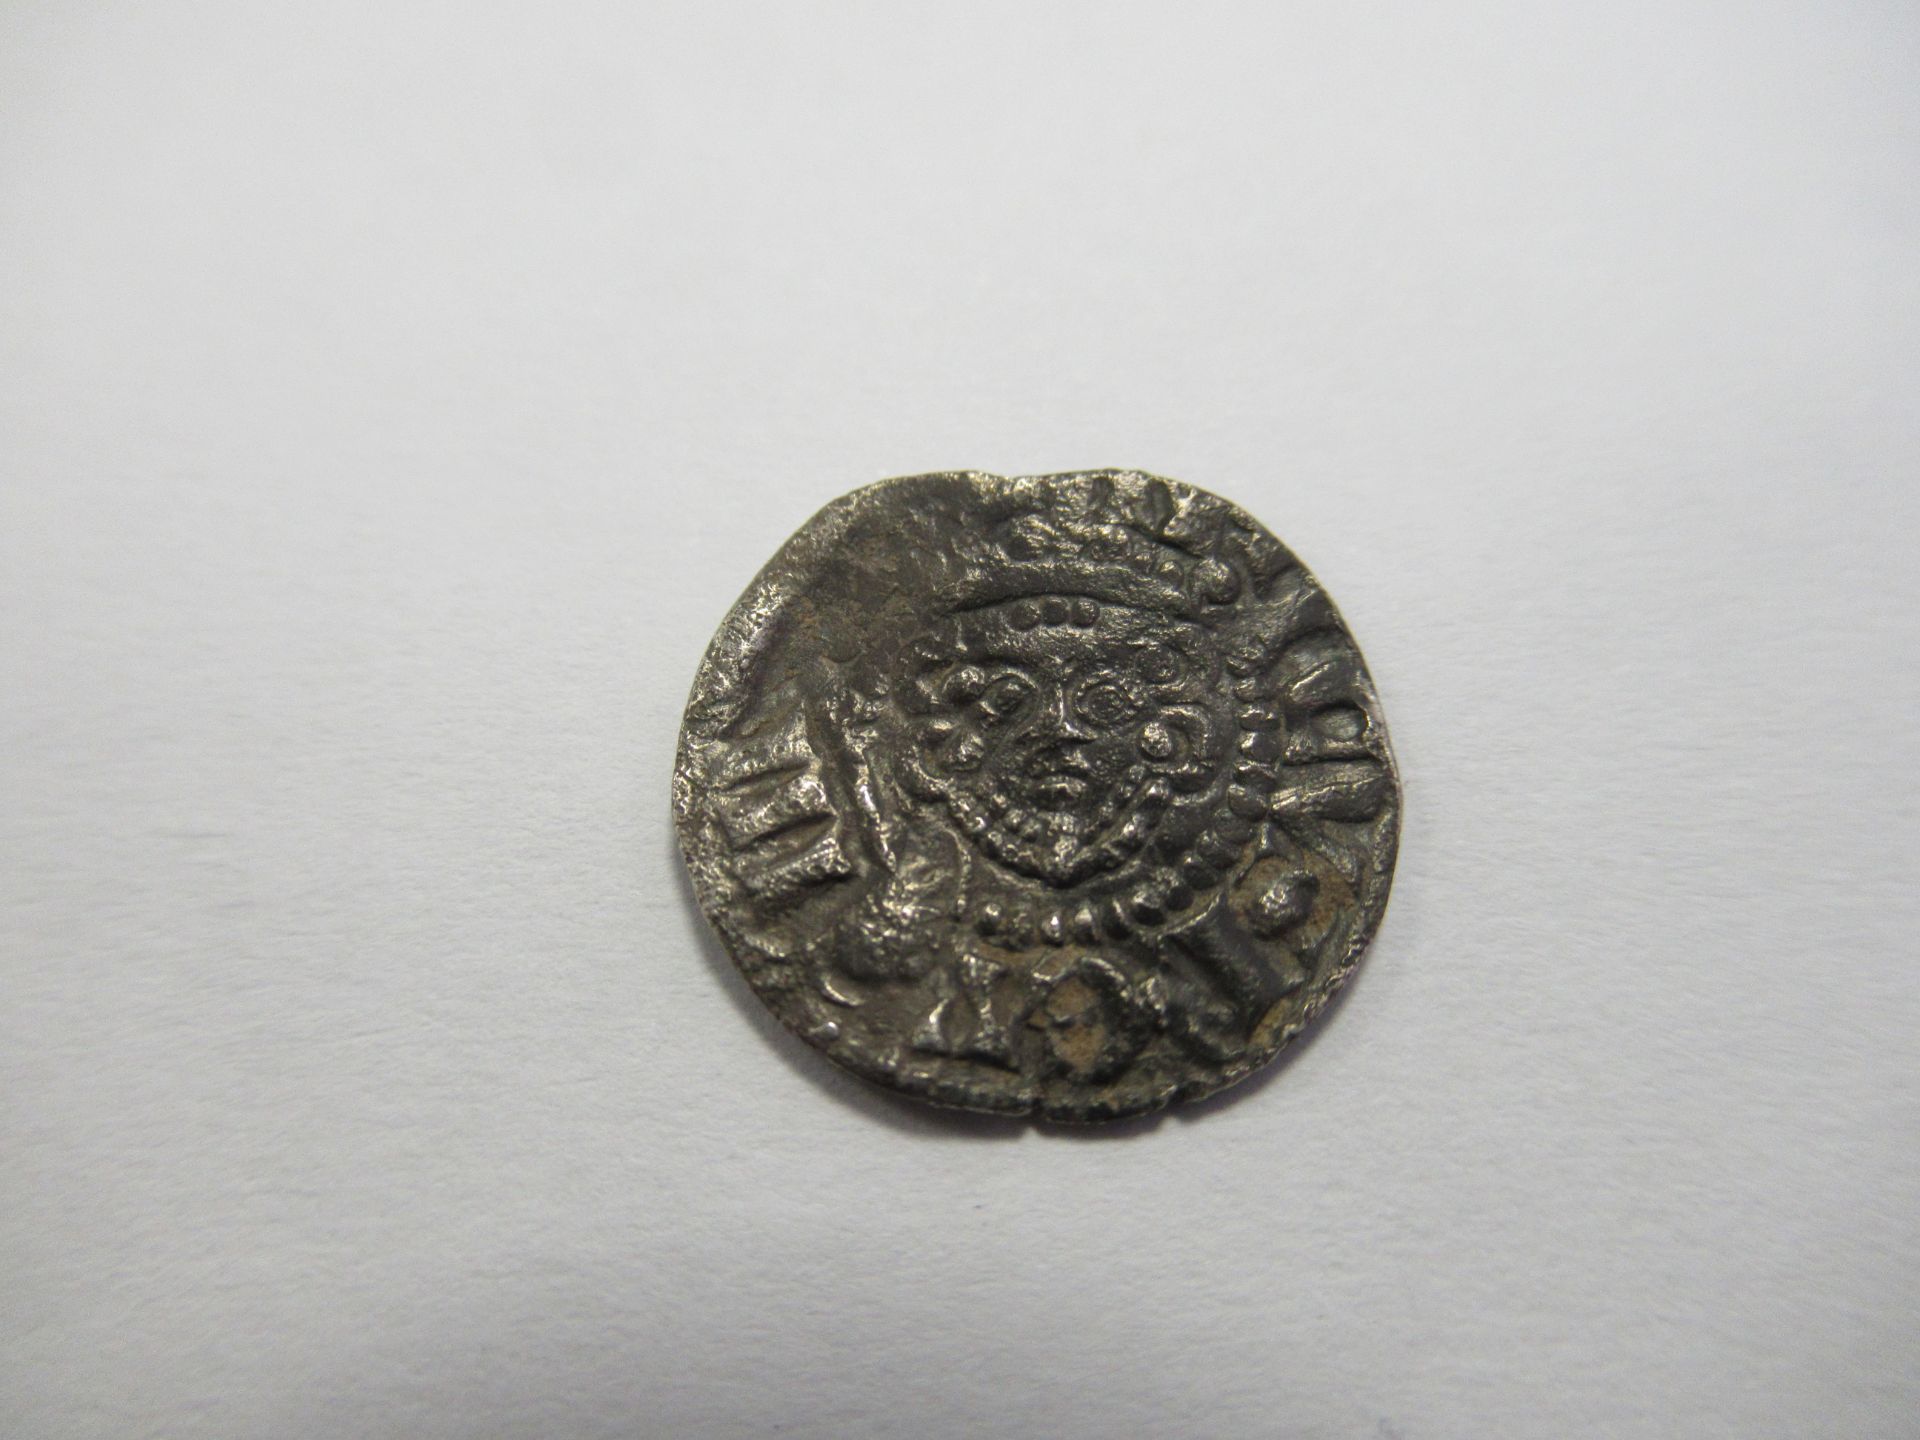 8x "silver" coins including Edwardian 1307-1310, Elizabethan Half Groat, Henry III coin etc - Image 8 of 17